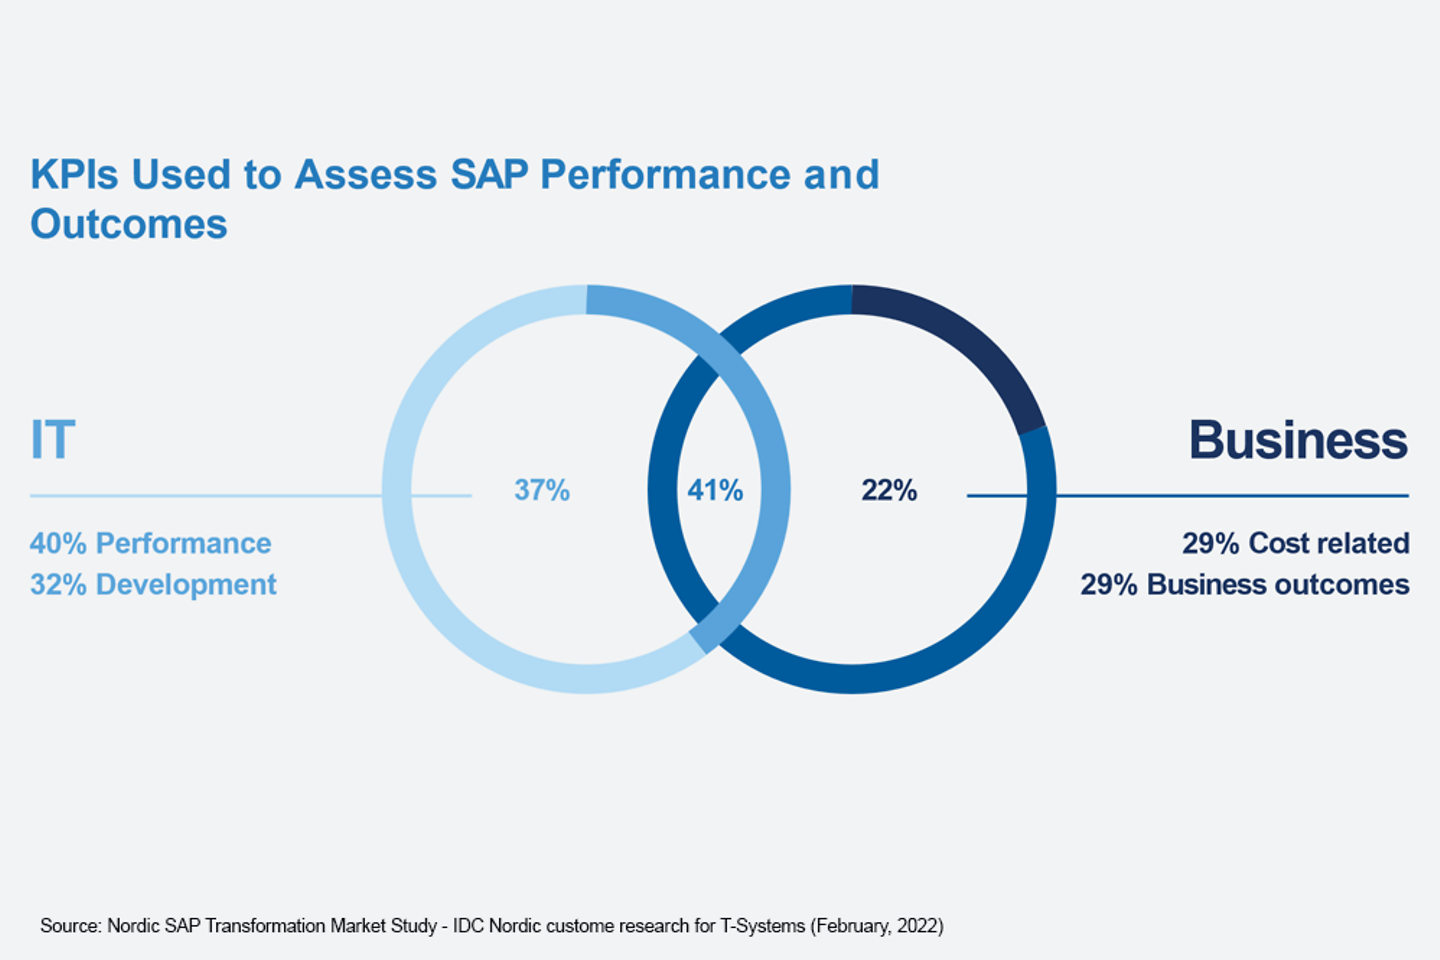 KPIs used to measure success of SAP performance